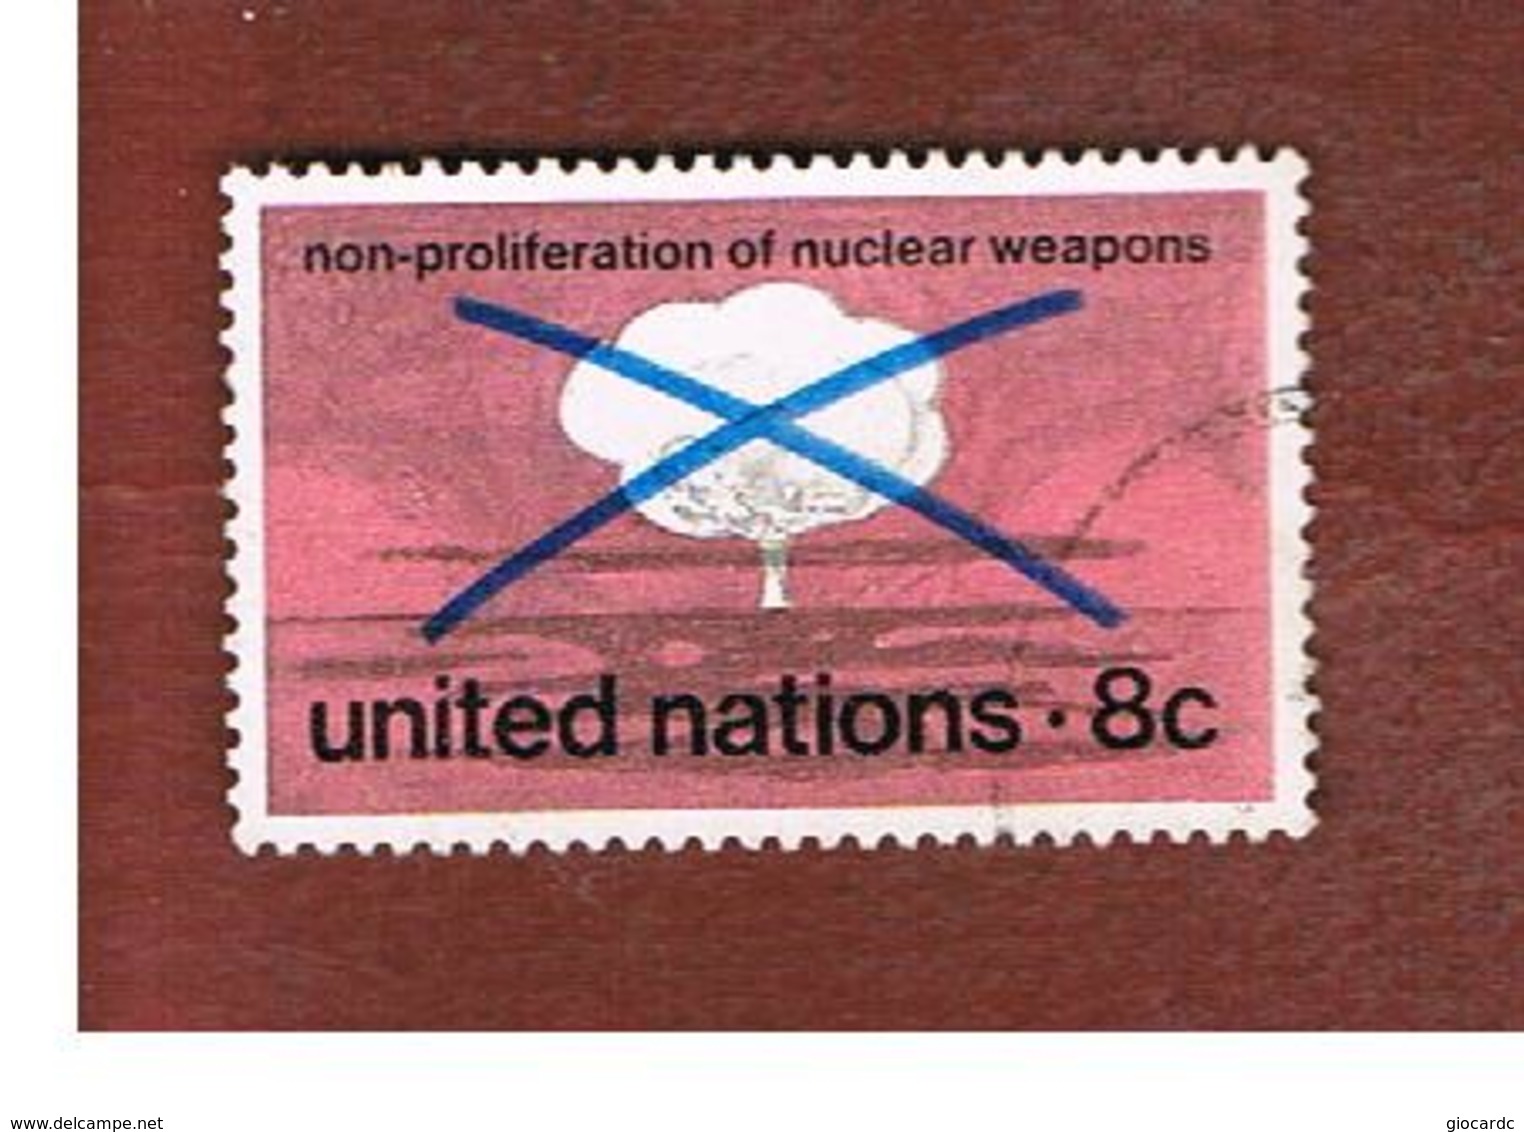 ONU (UNITED NATIONS) NEW YORK   - SG NY227   -  1972 NON-PROLIFERATION OF NUCLEAR   WEAPONS    - USED - Usati